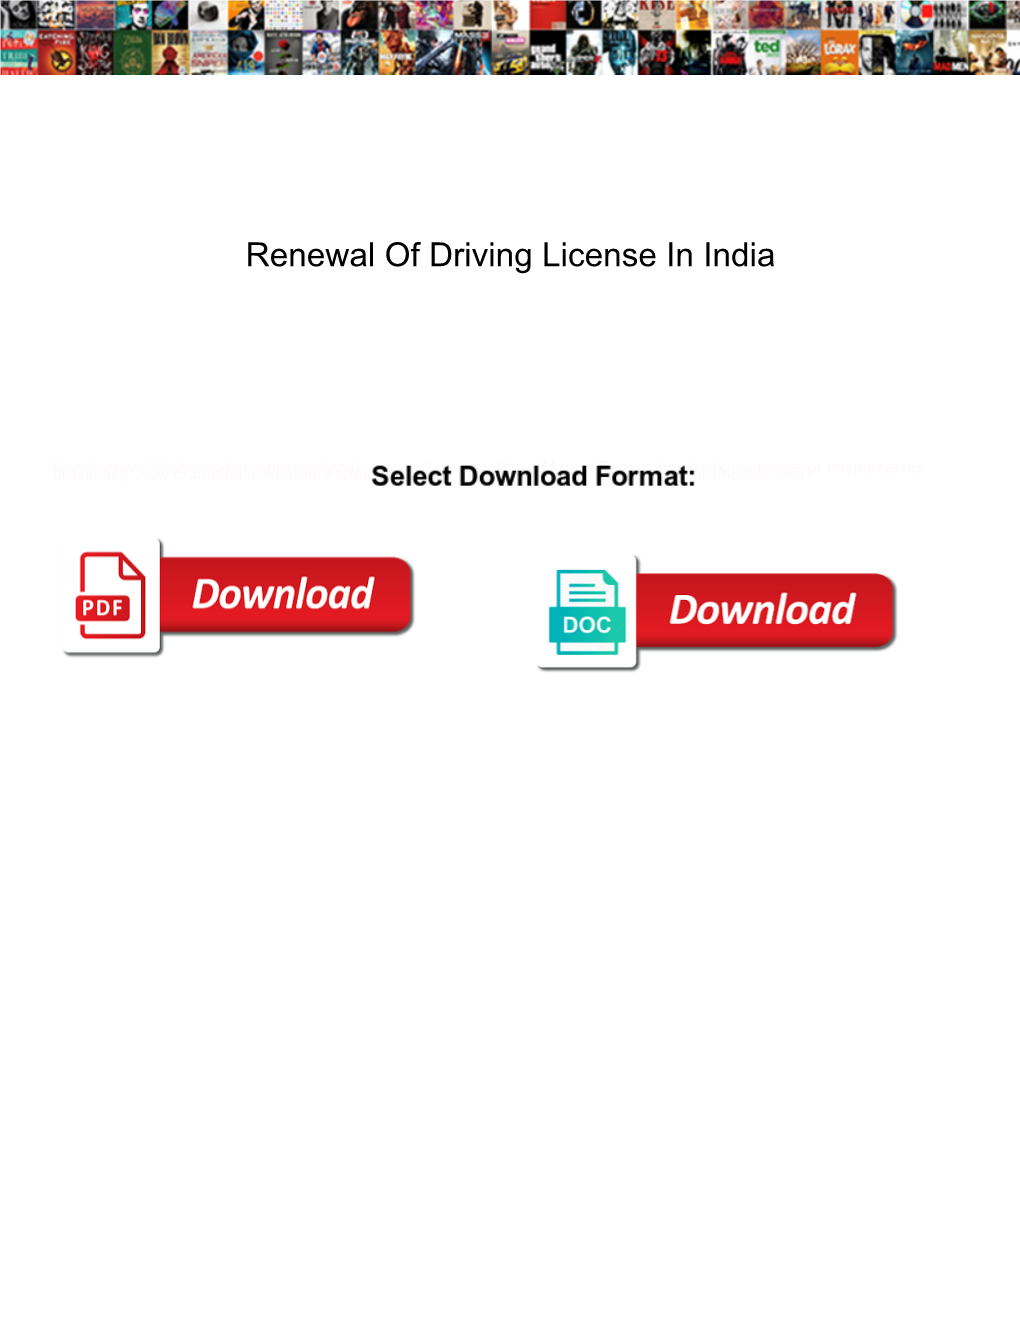 Renewal of Driving License in India